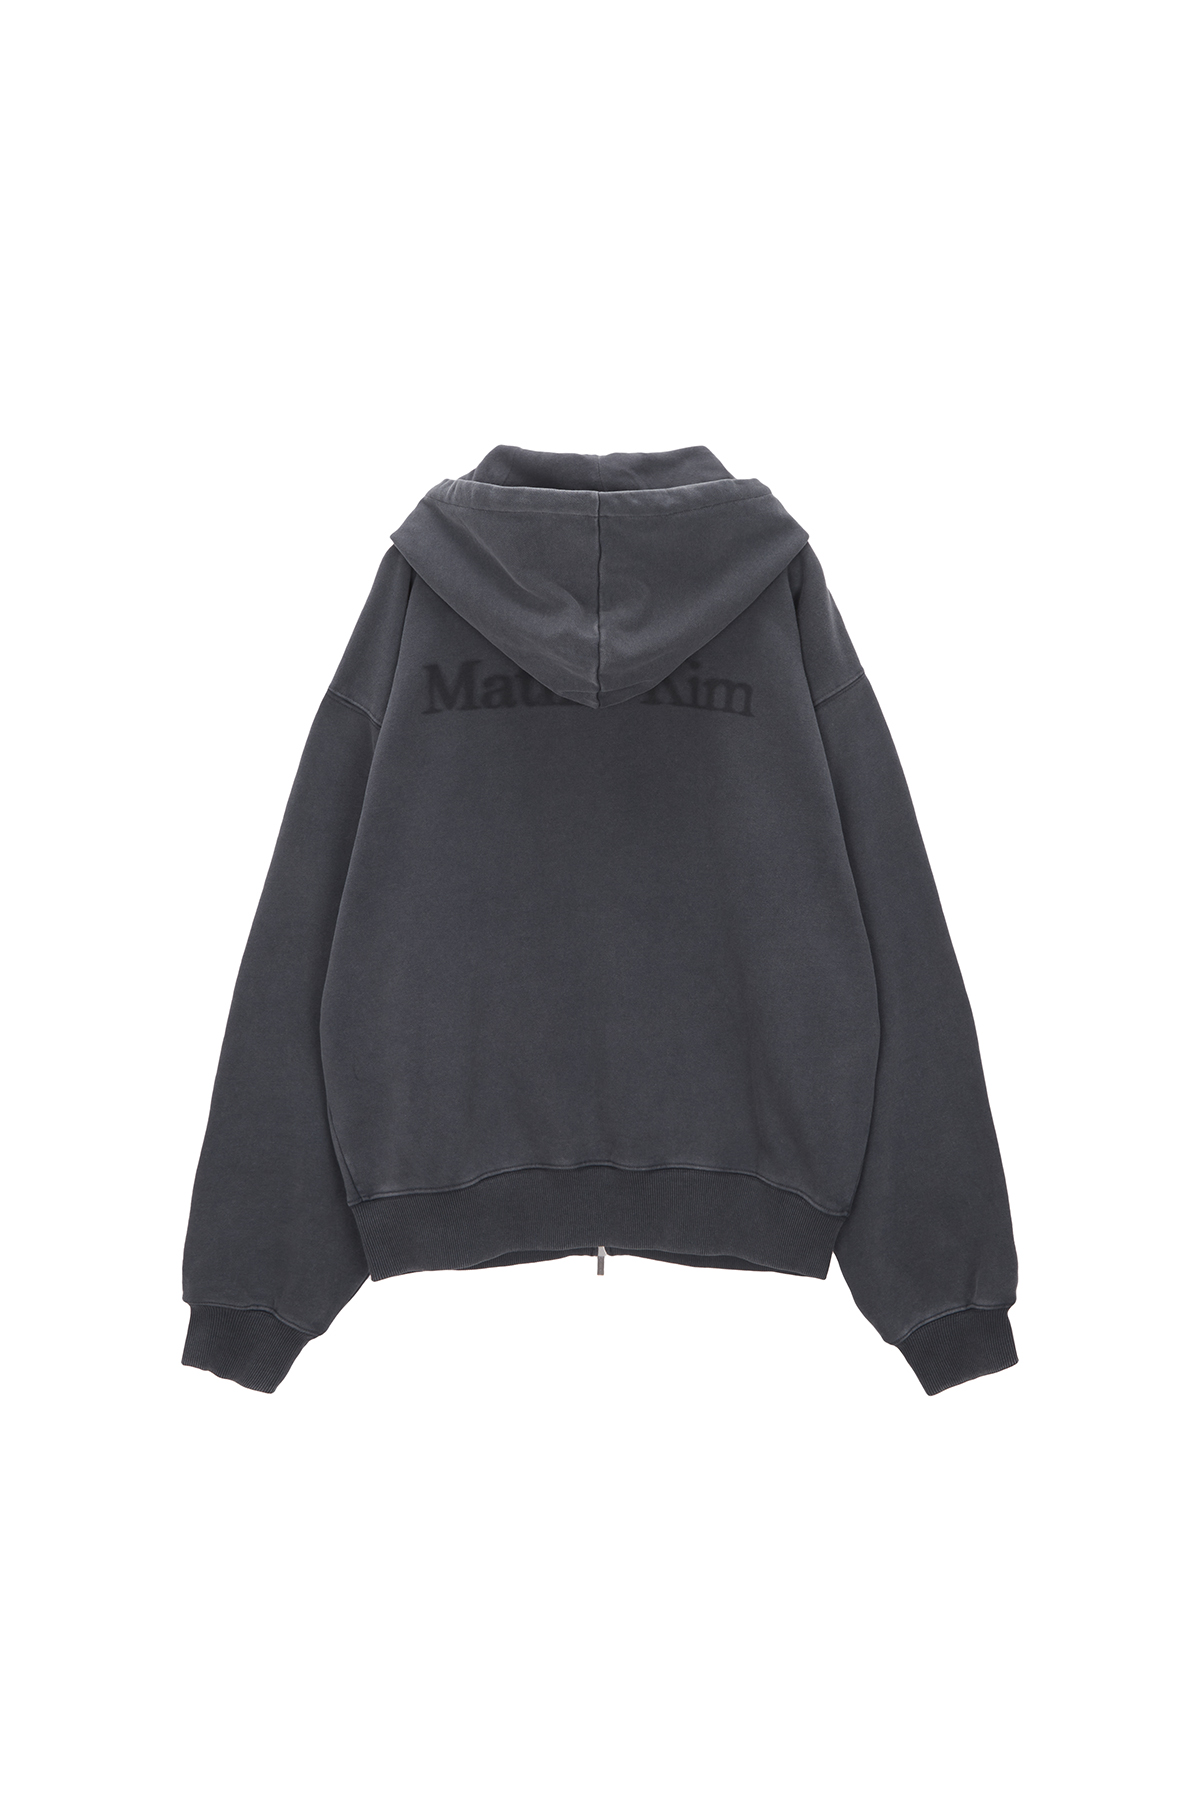 PIGMENT DYING LOGO HOODY ZIP UP IN CHARCOAL